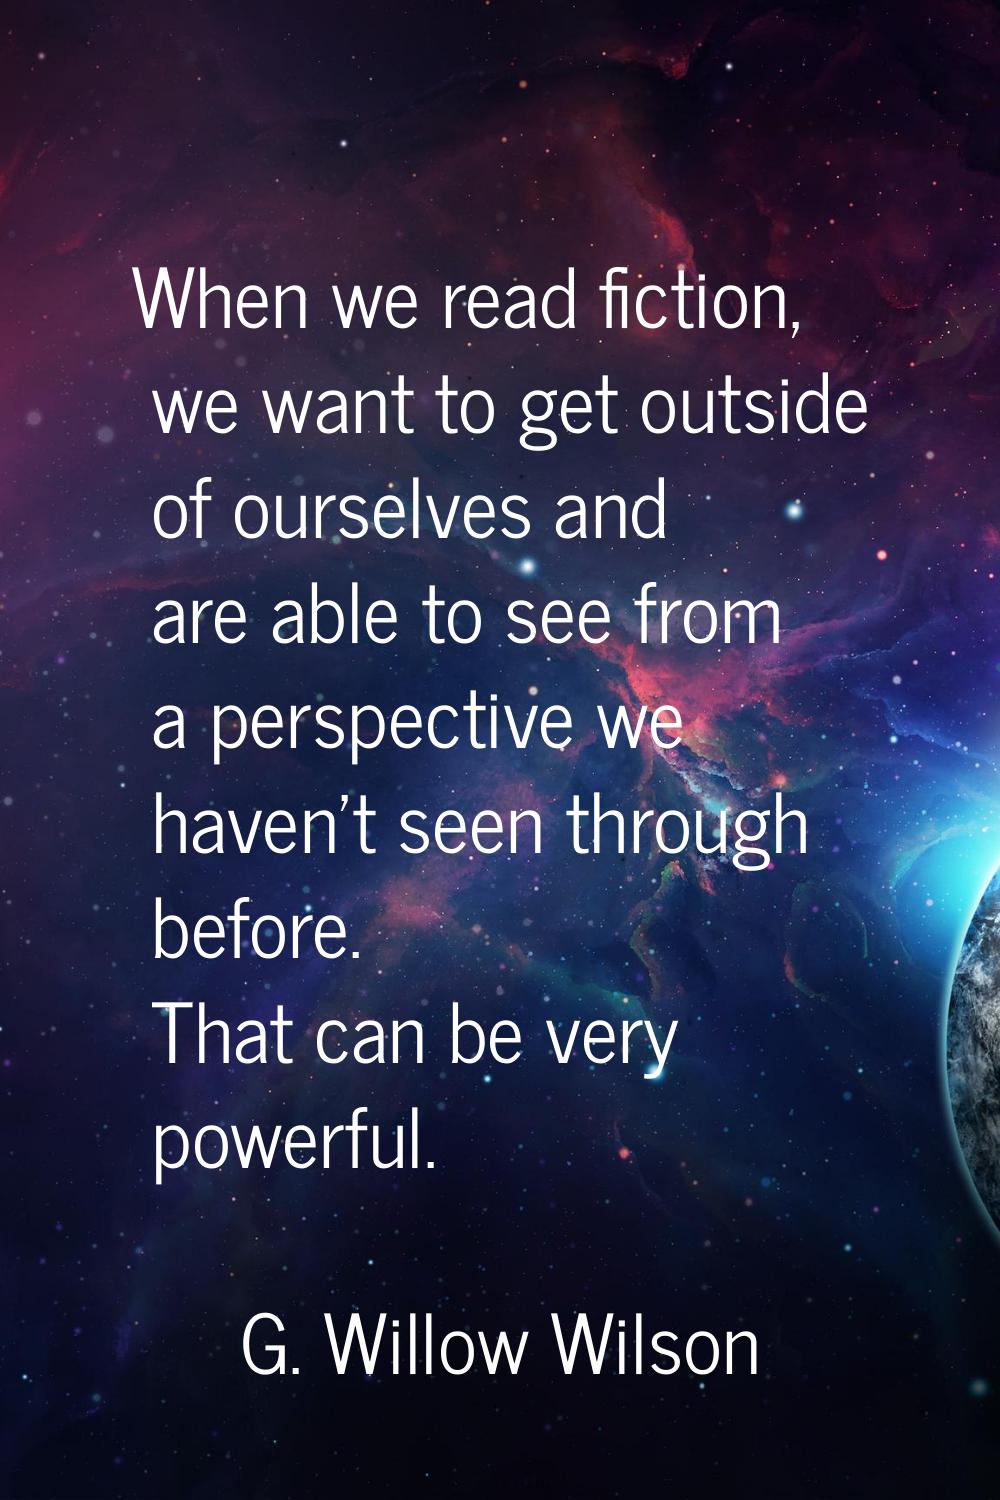 When we read fiction, we want to get outside of ourselves and are able to see from a perspective we